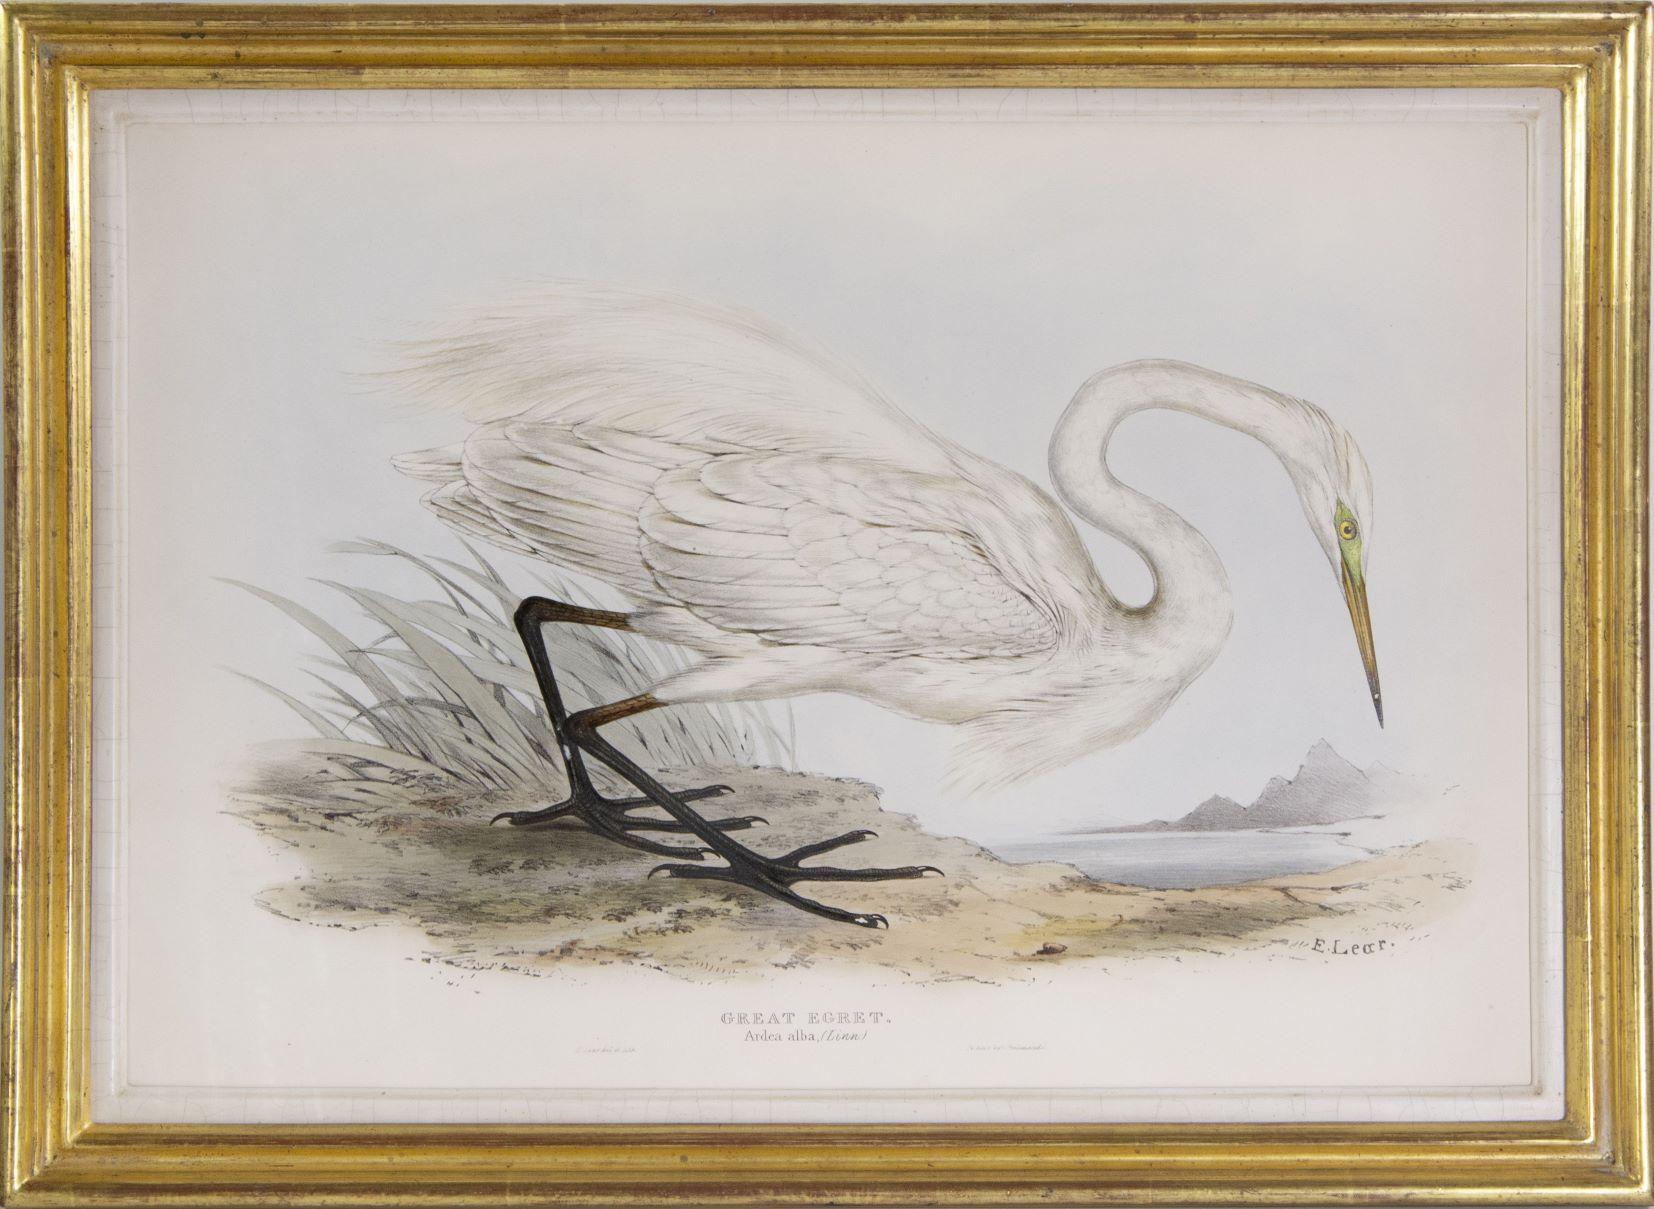 A Group of Four Wading Birds. - Print by Edward Lear